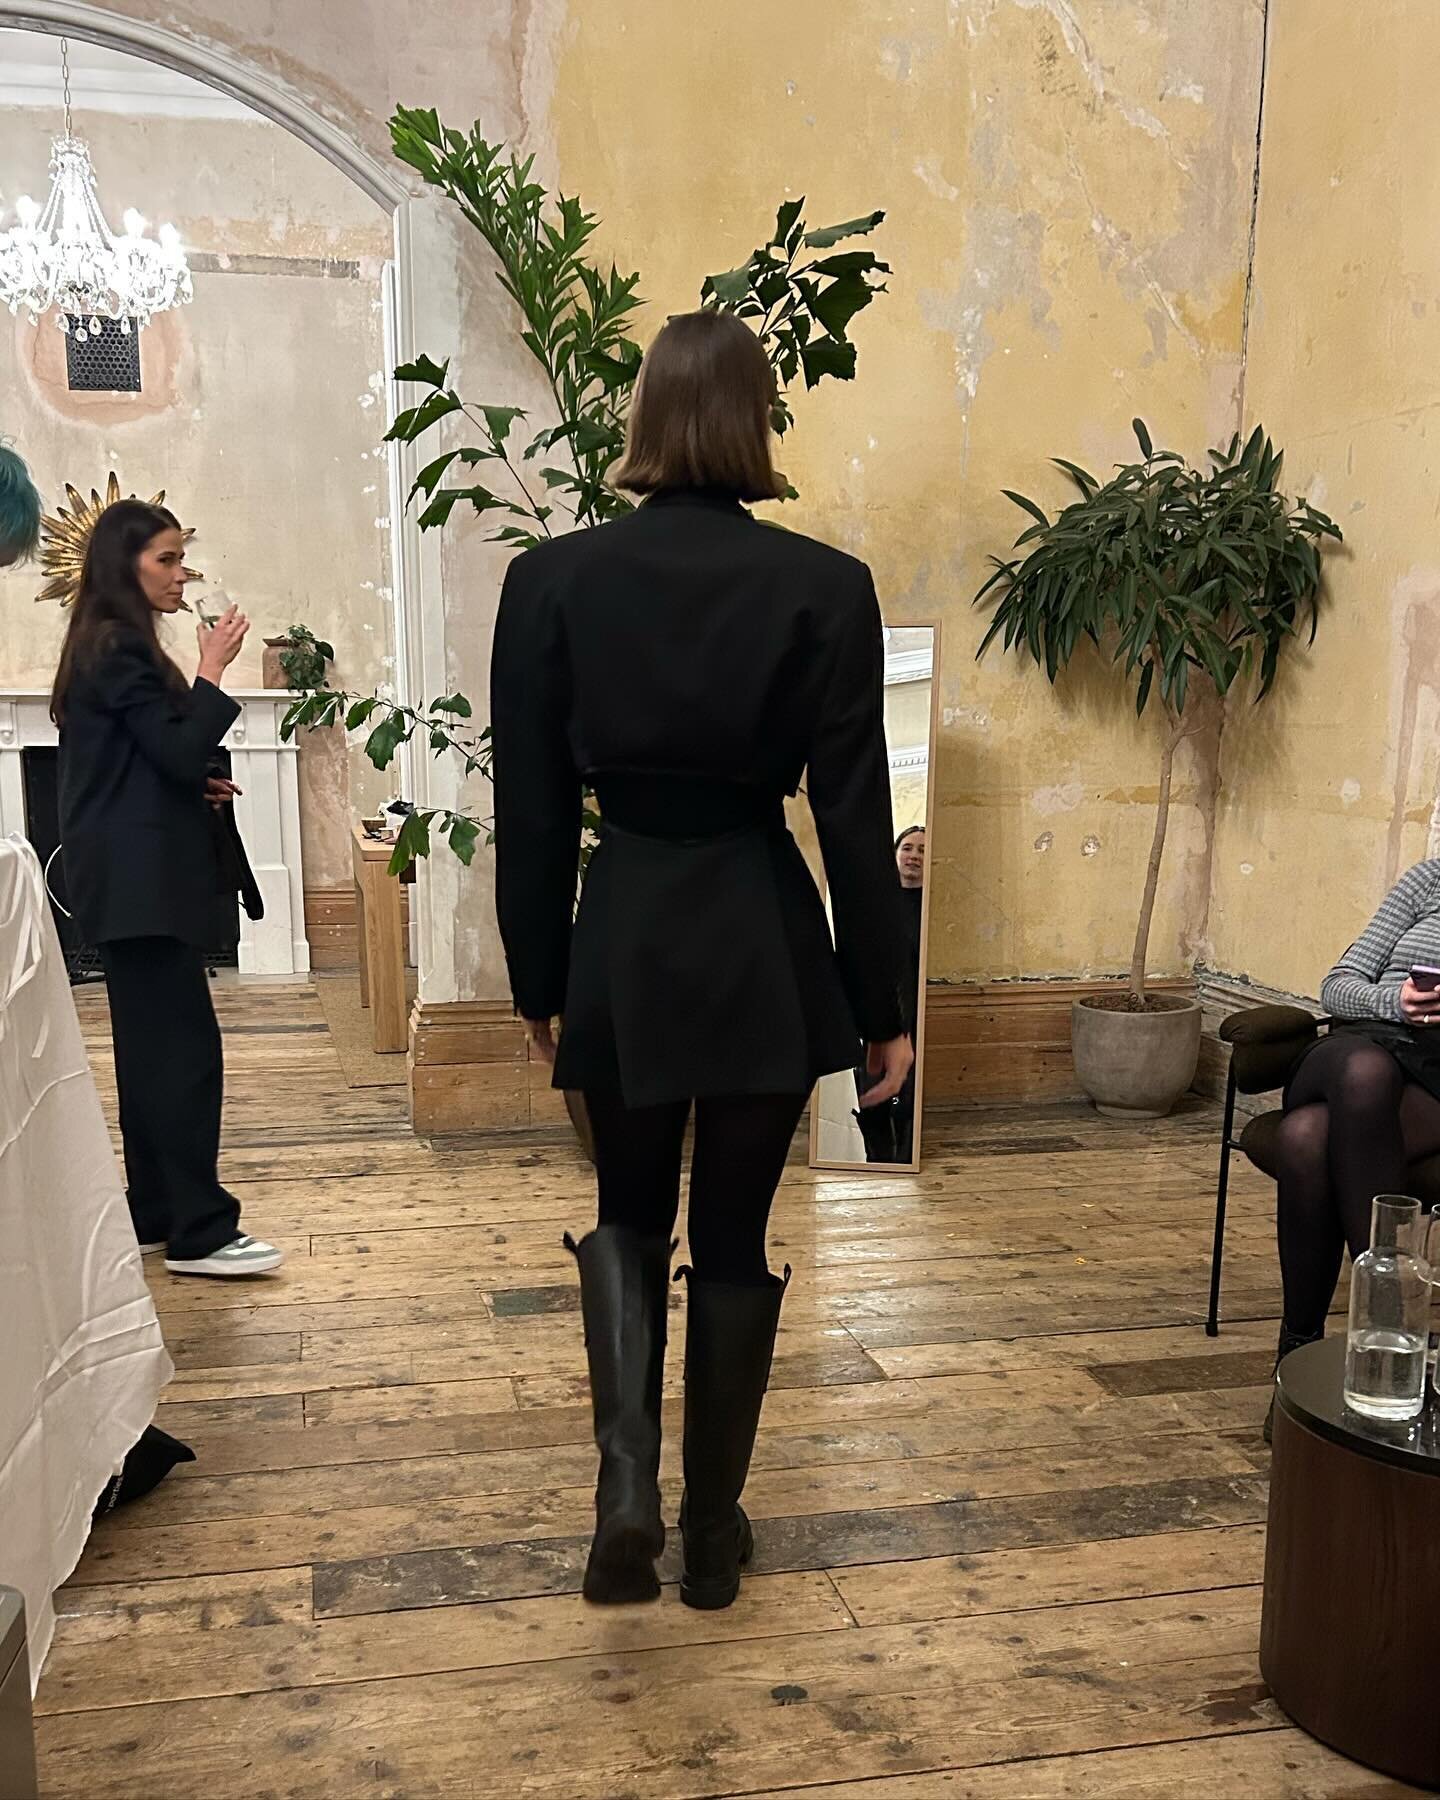 We are obsessed with Iso&rsquo;s blazer set Lisha made. It&rsquo;s fresh, modern take on a classic piece. We can&rsquo;t wait to see how she styles it in the wild 🖤